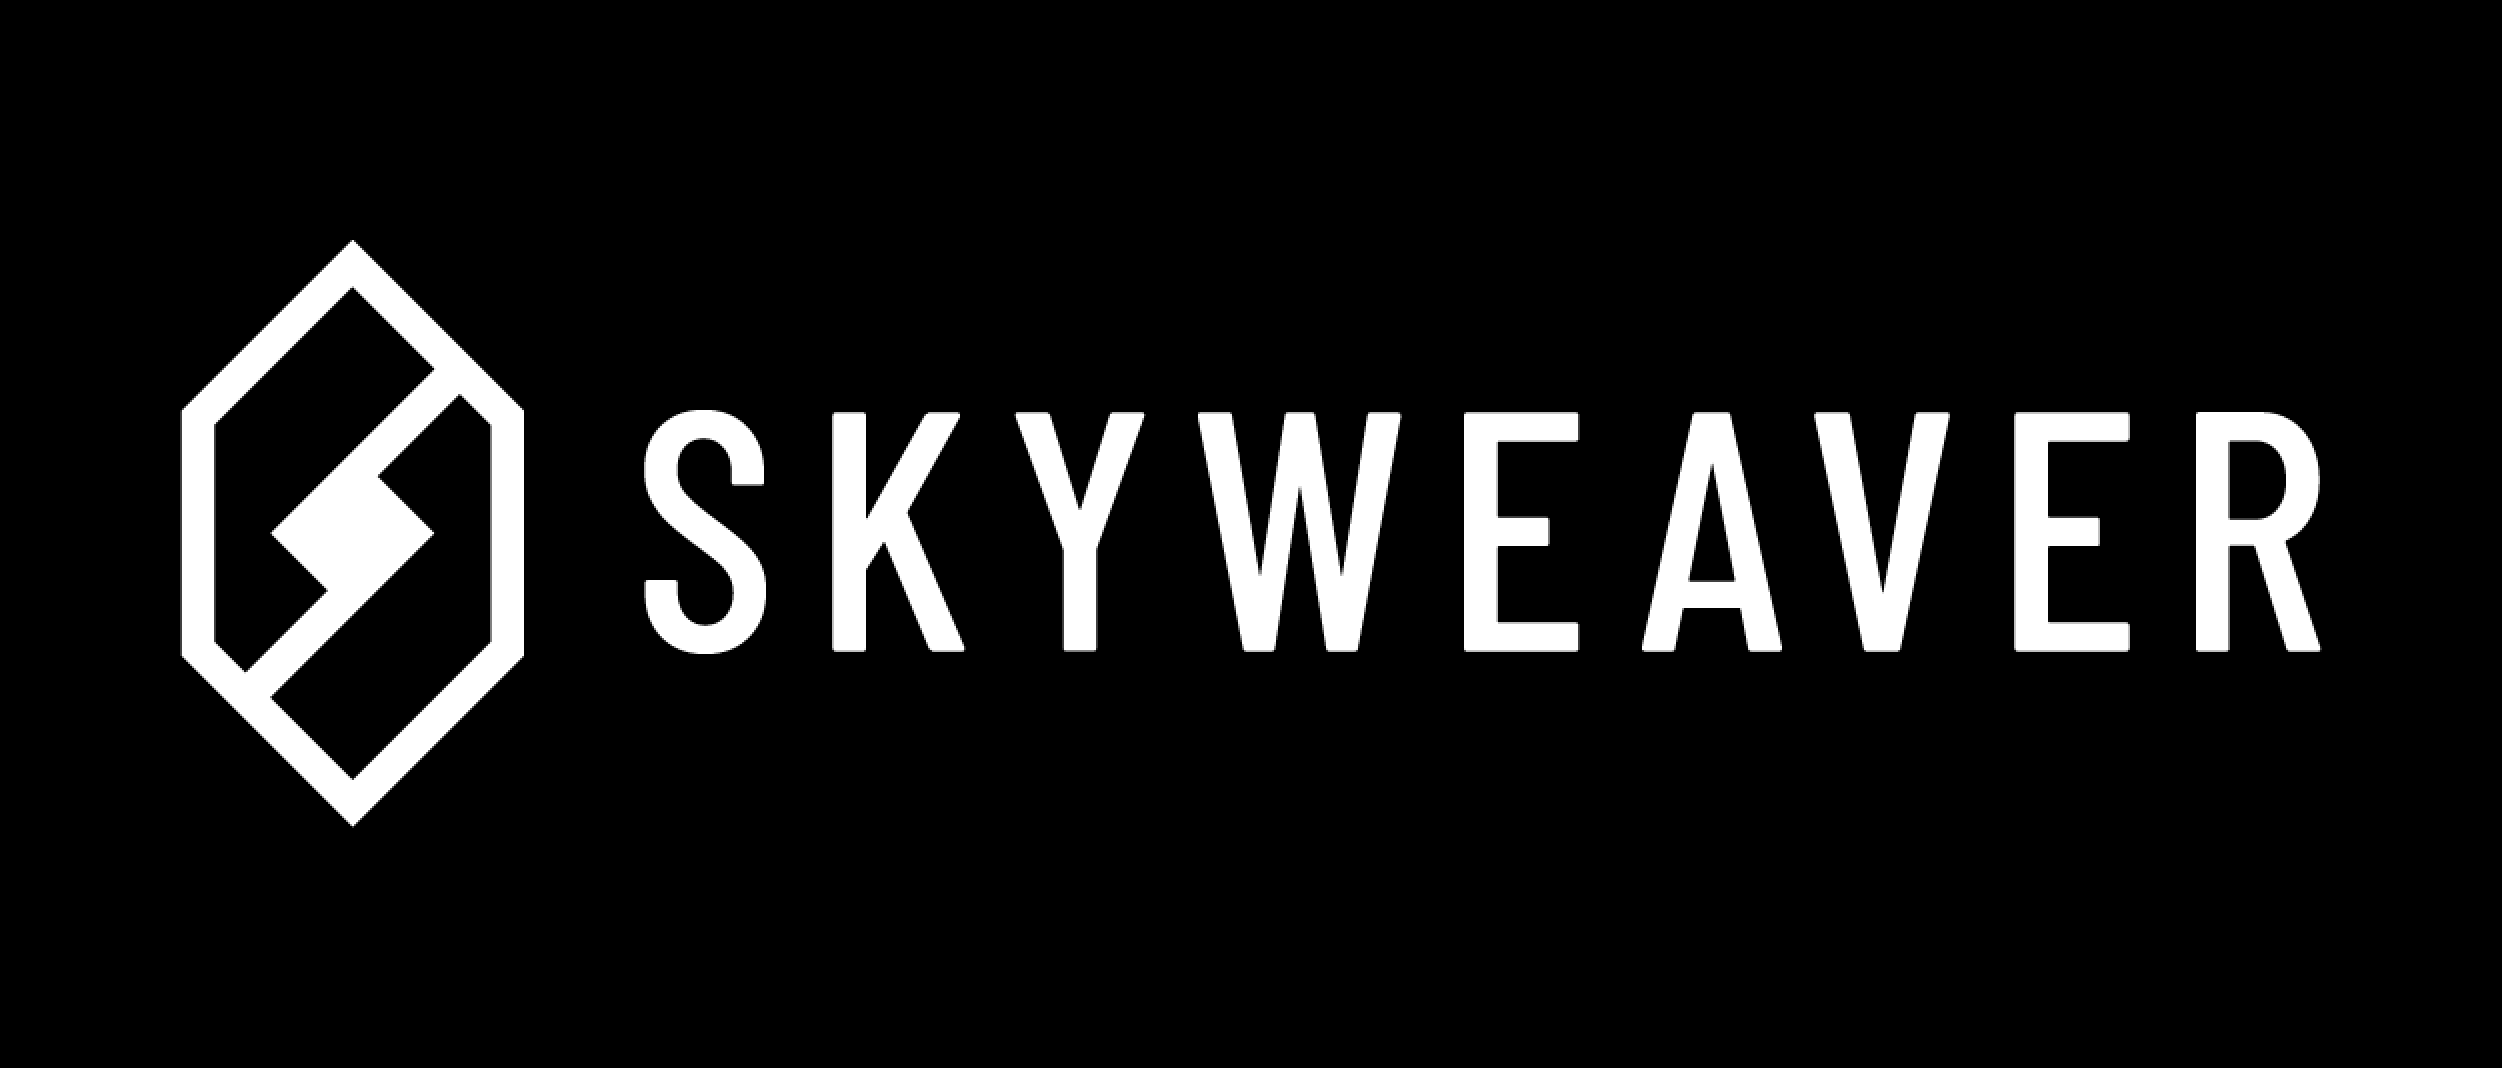 Play-To-Earn NFT Trading Card Game Skyweaver Launches With Backing From Alexis Ohanian And Coinbase